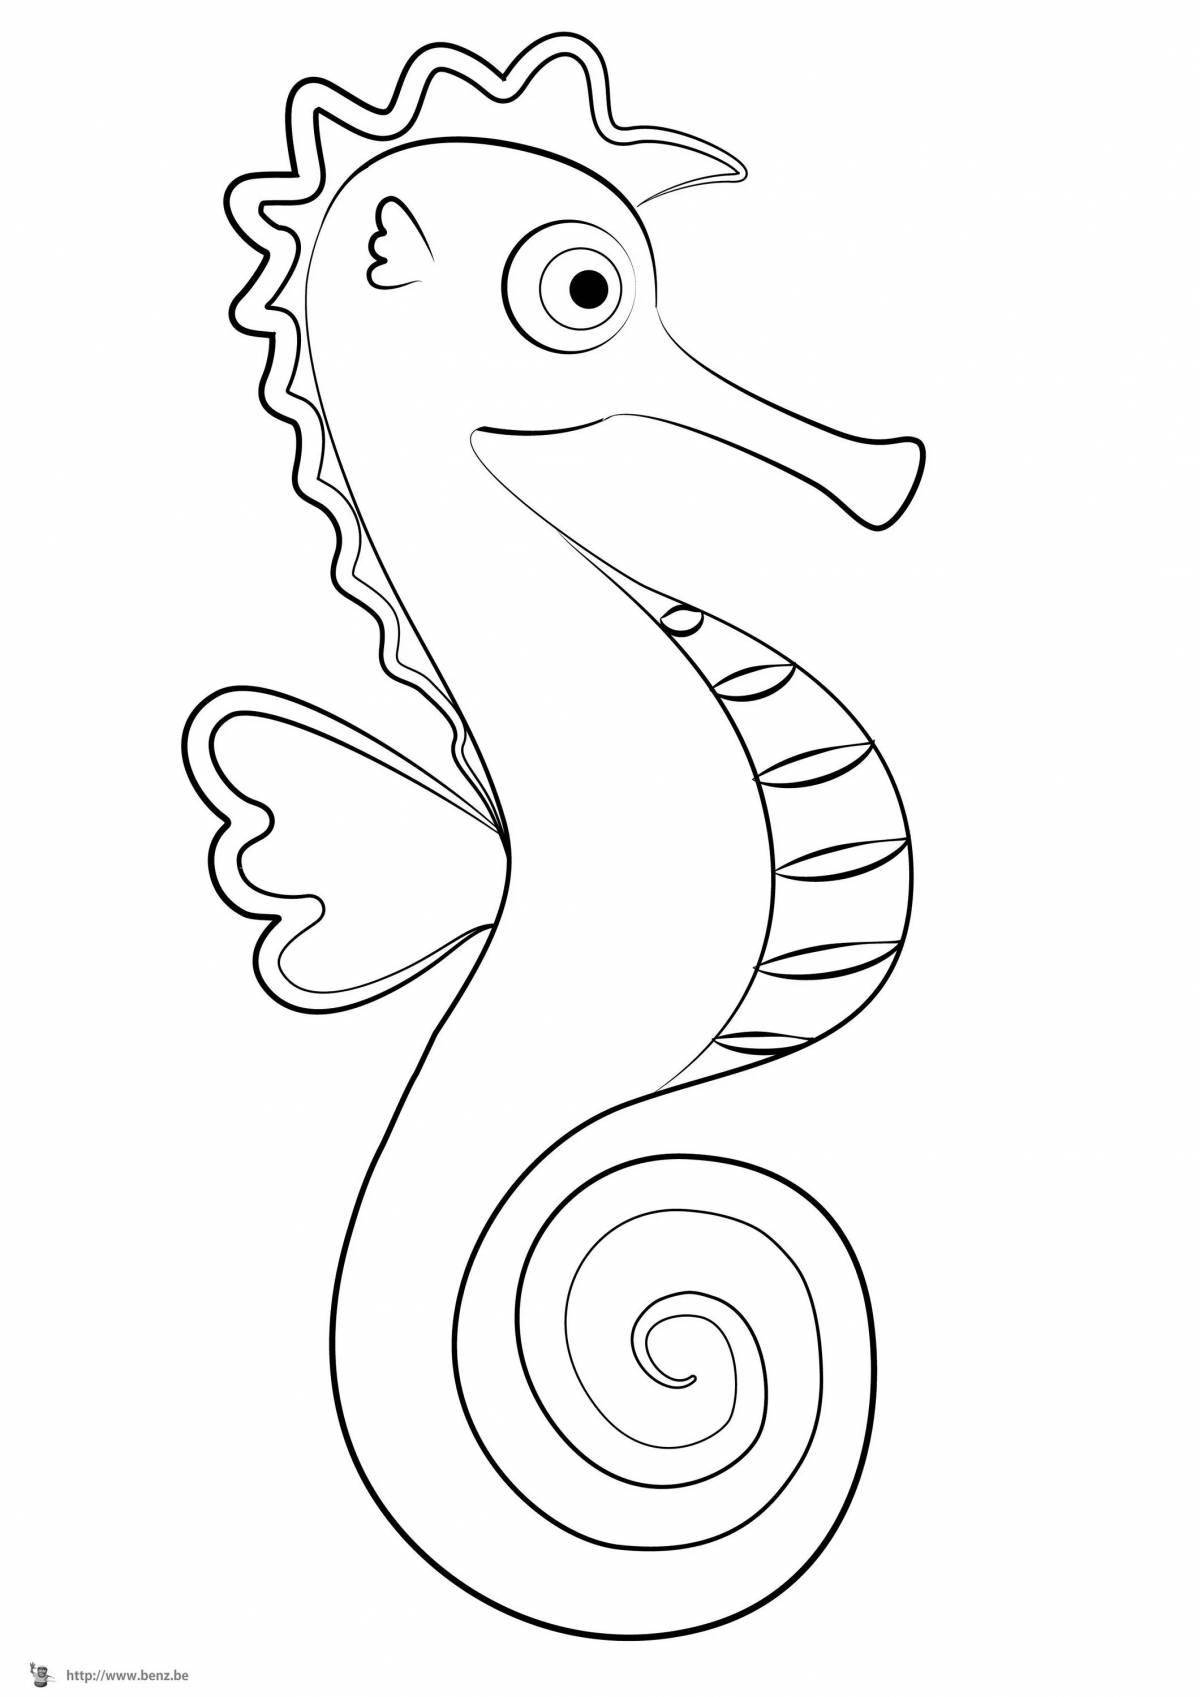 Live seahorse coloring book for kids